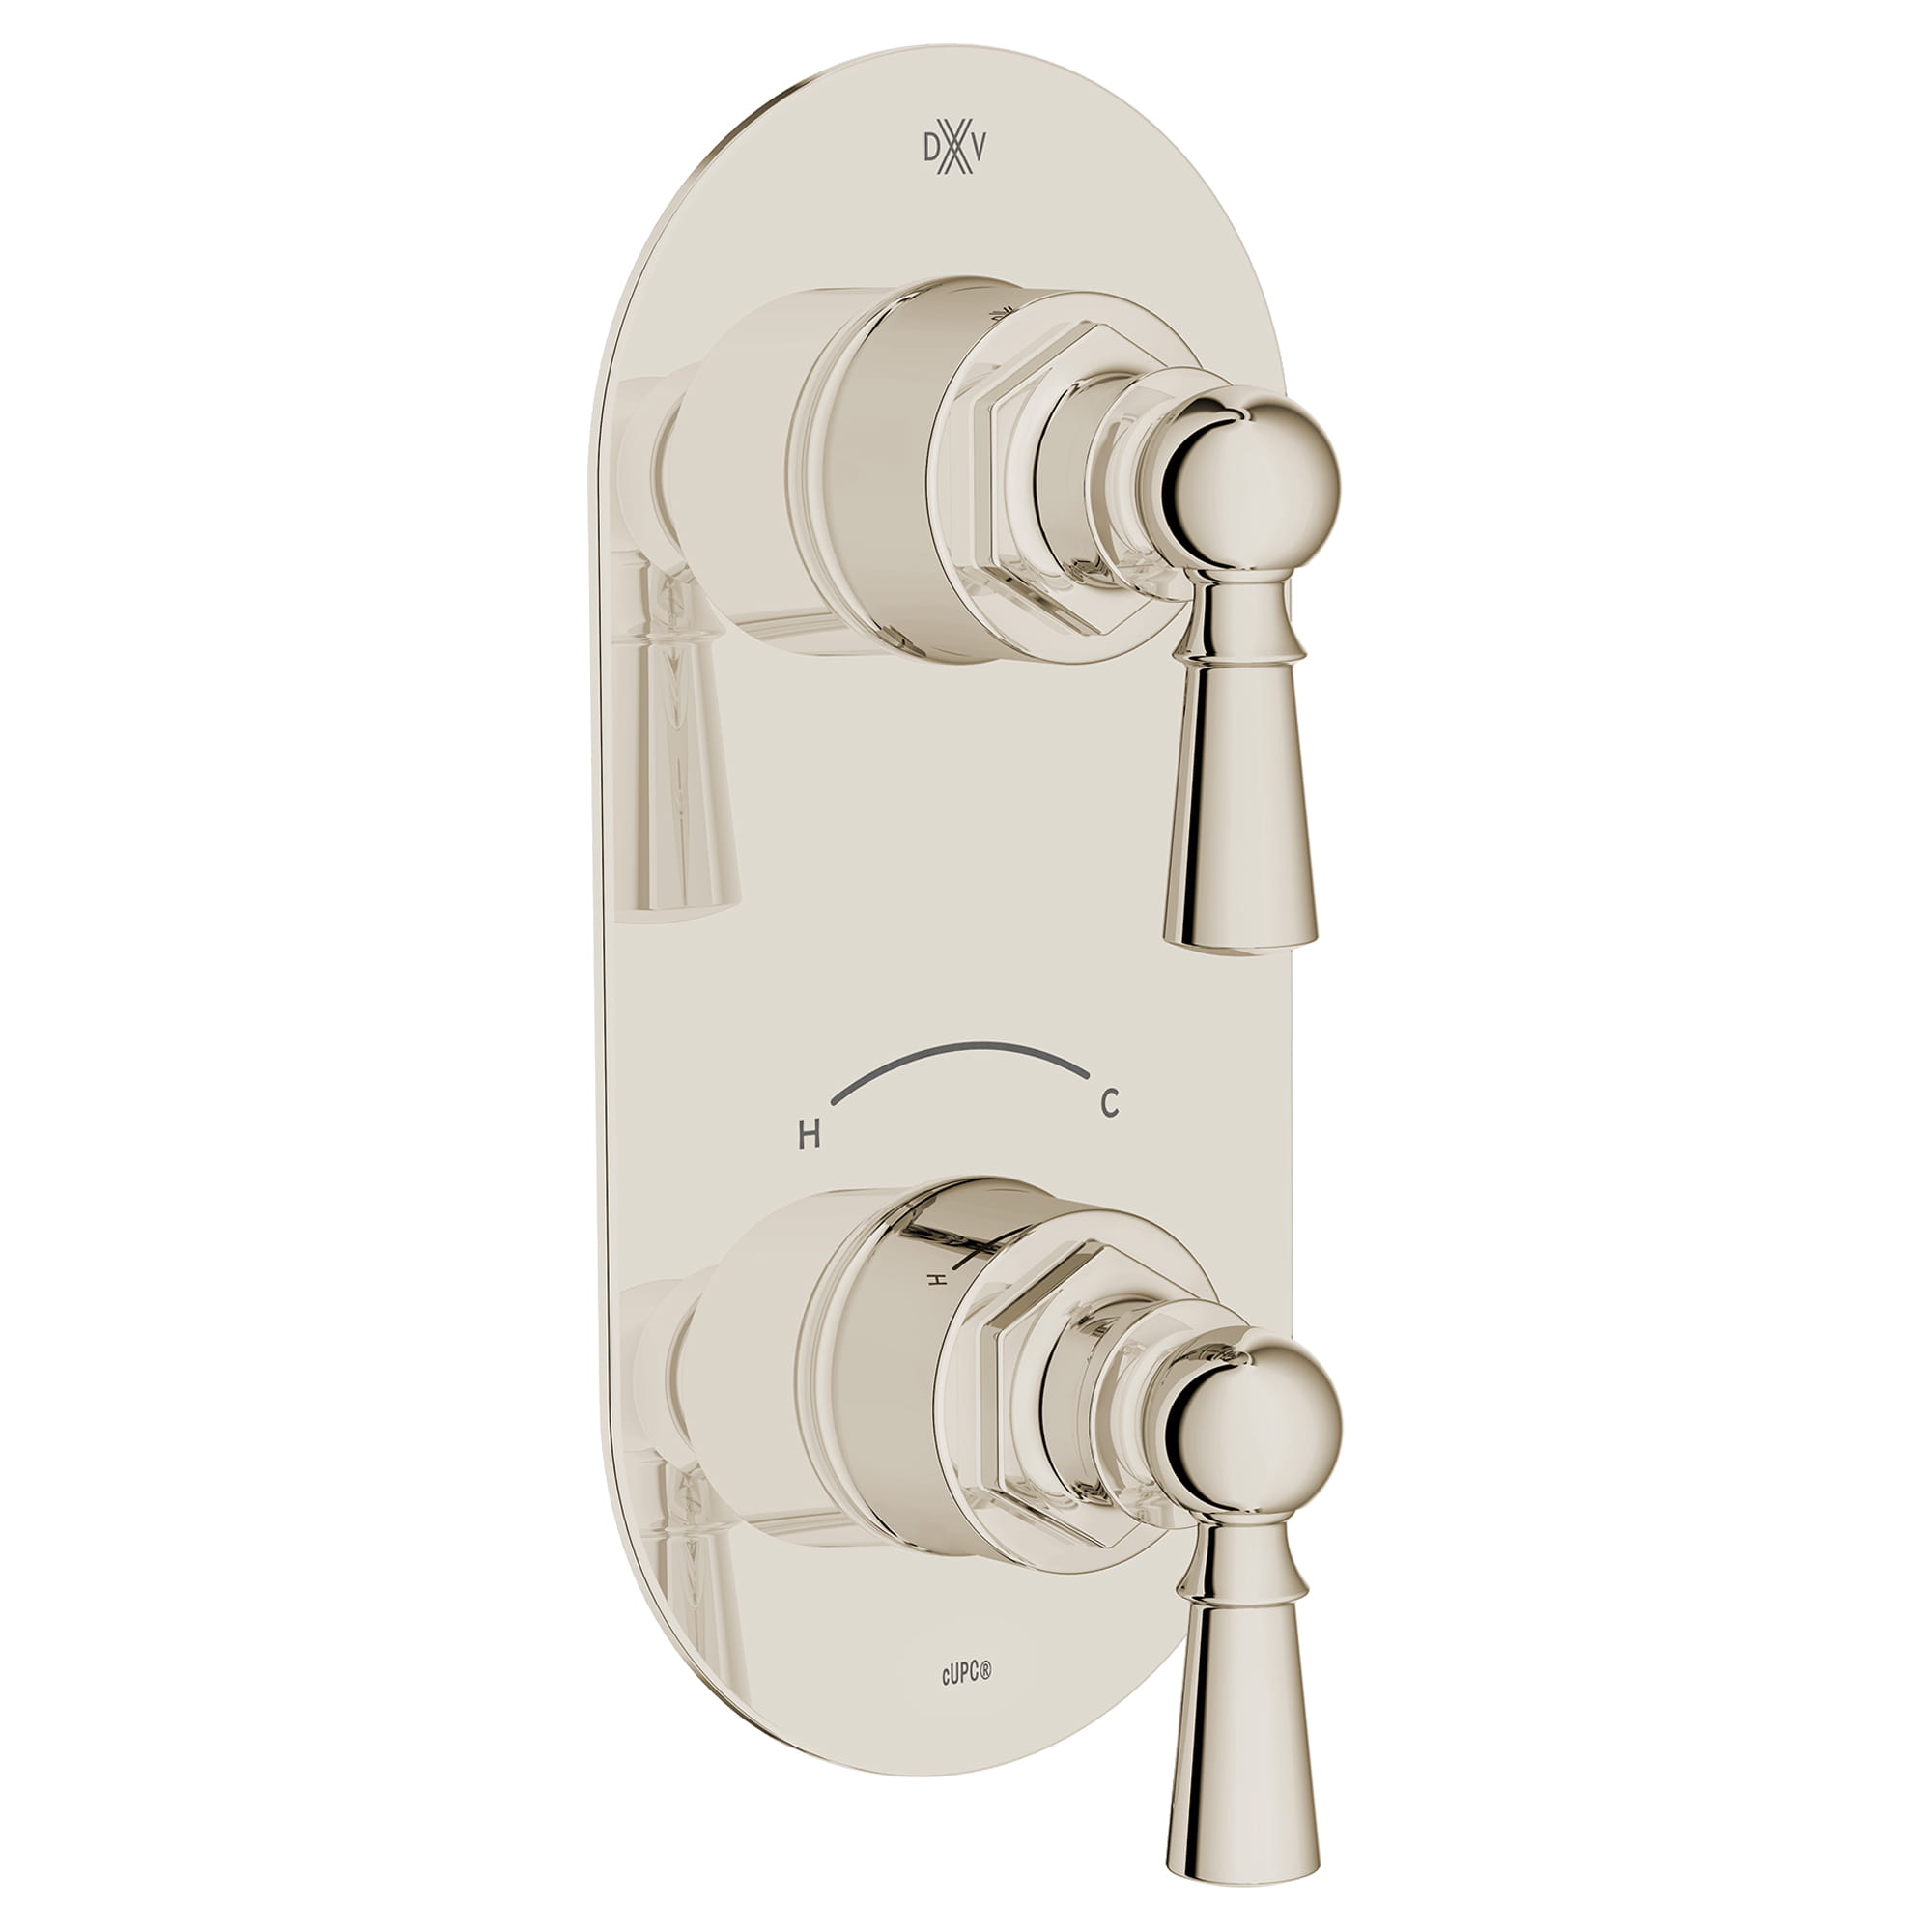 Oak Hill 2-Handle Thermostatic Valve Trim Only with Lever Handles